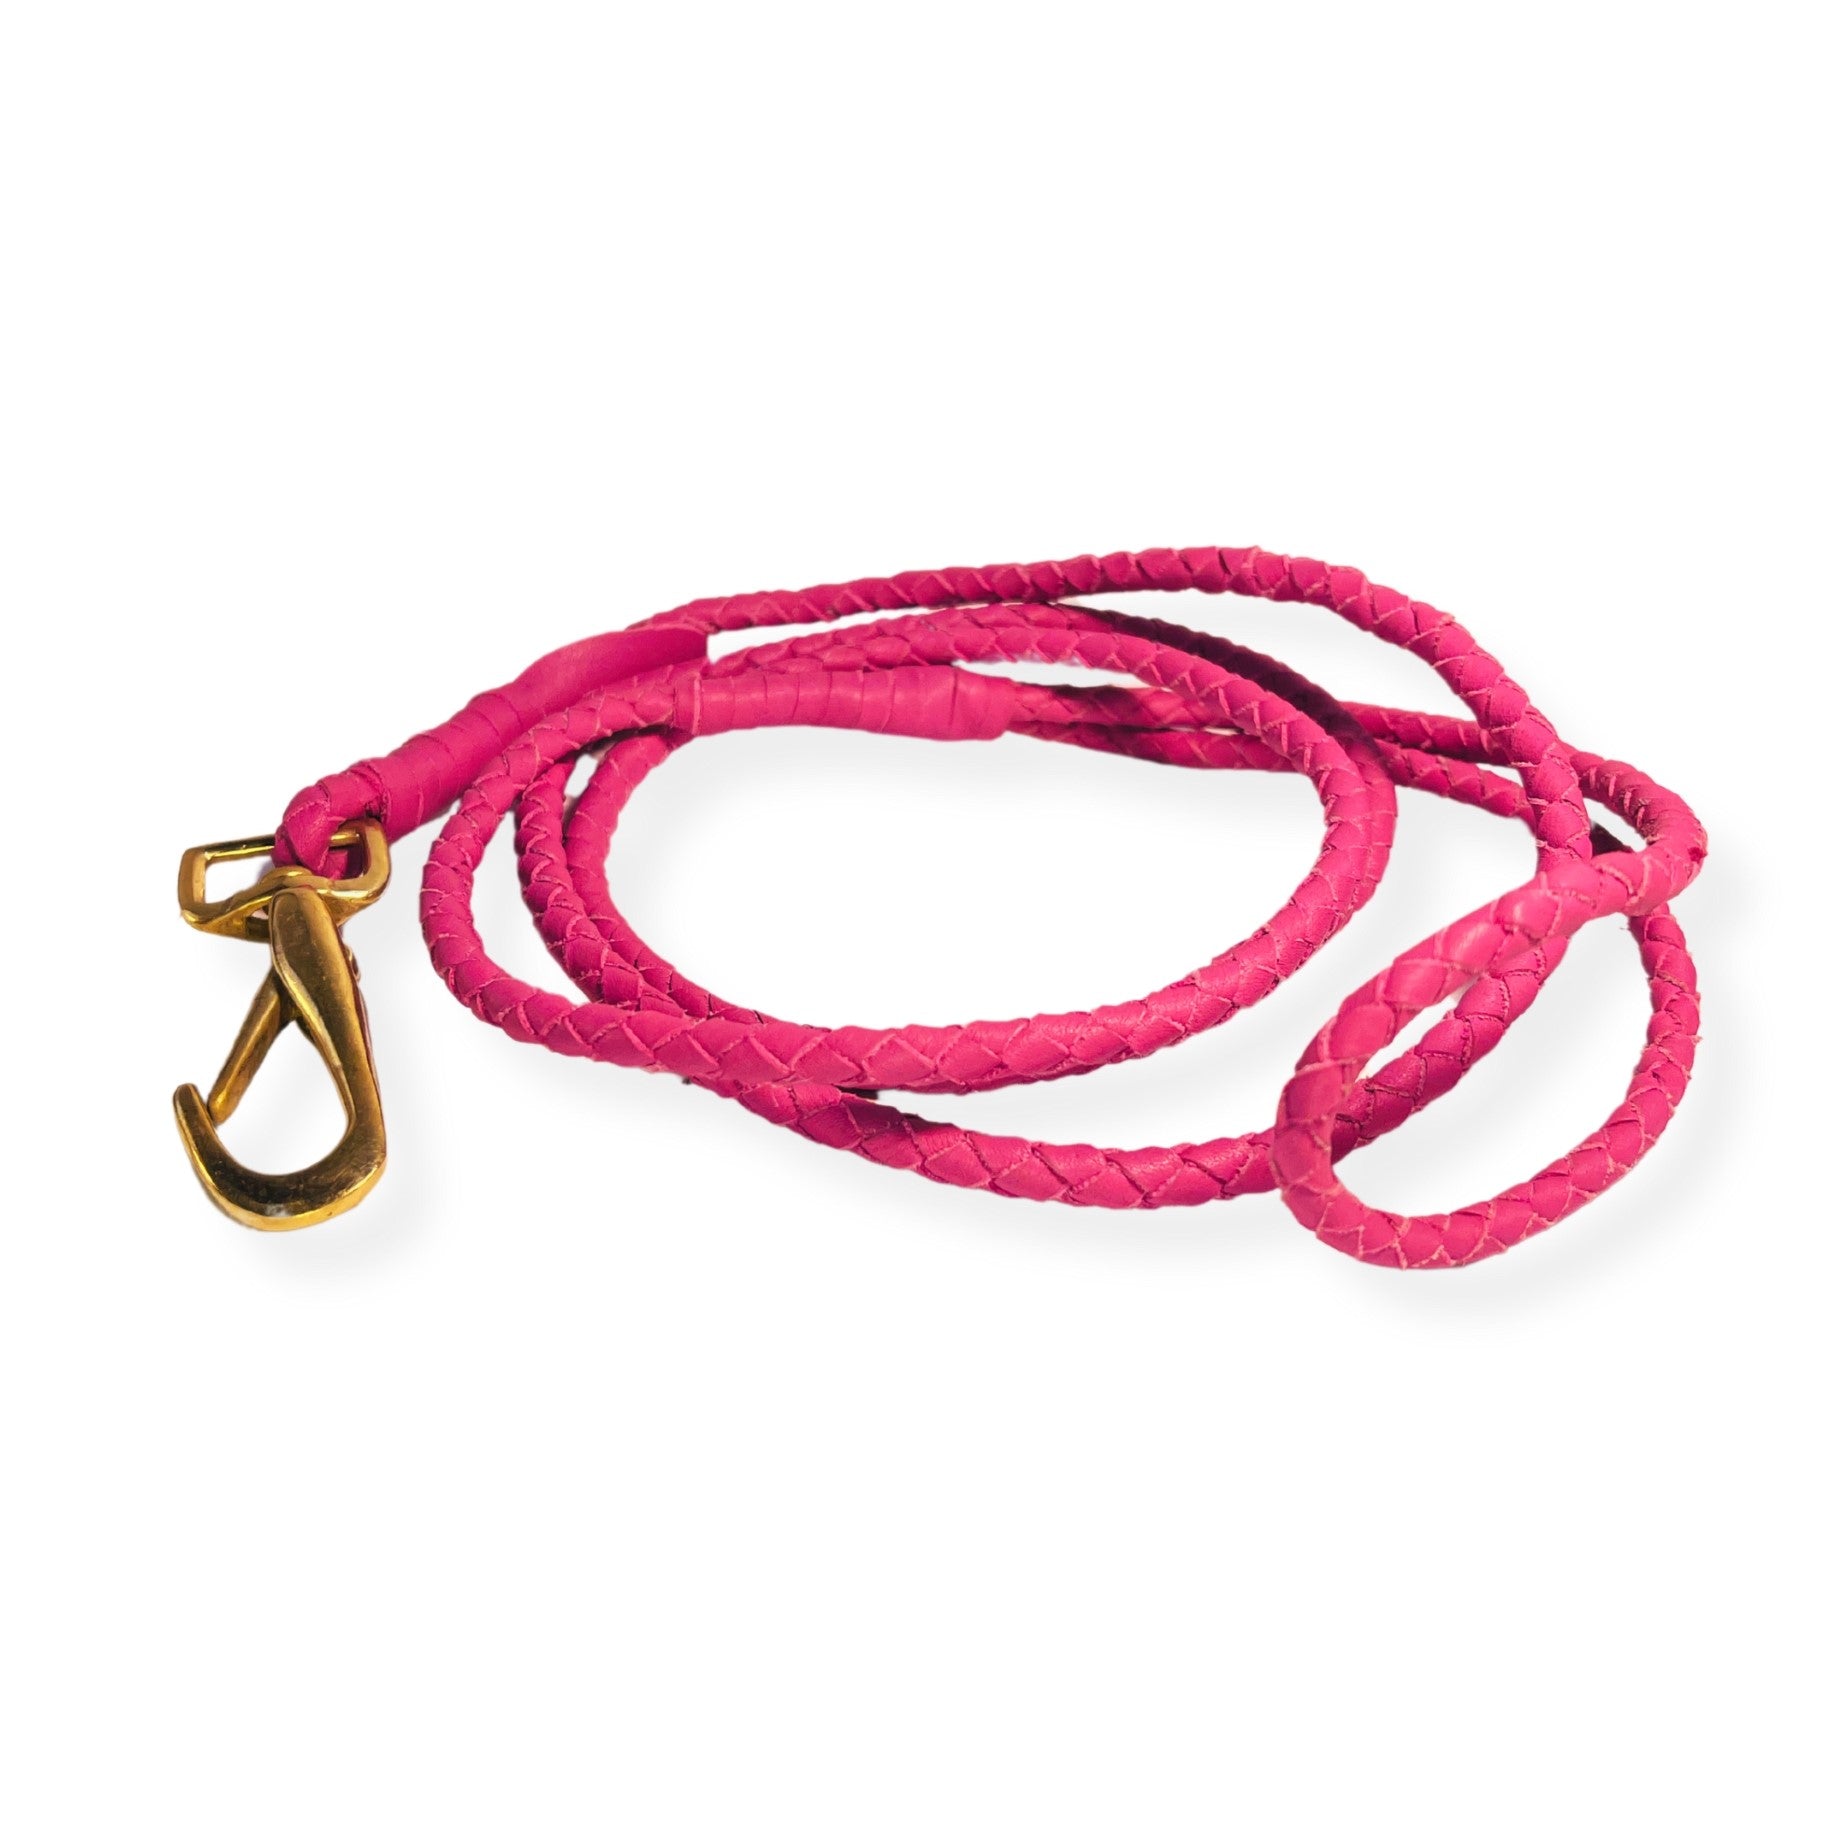 A vibrant hot pink "Lulu Lead" braided buffalo leather lead with a glossy brass carabiner clasp, isolated on a white background, showcasing a fashionable accessory for pet owners by Georgie Paws.